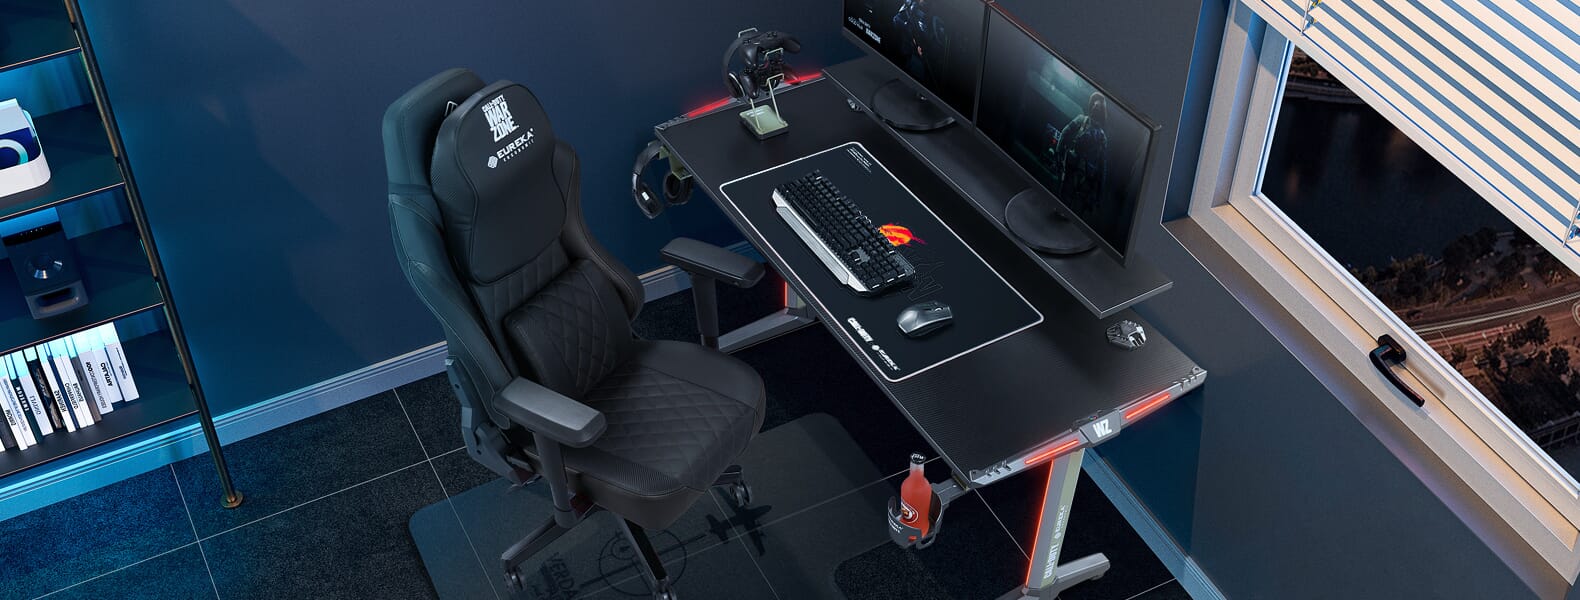 Sentry RGB gaming desk with Olt Times mousepad overhead view desktop banner